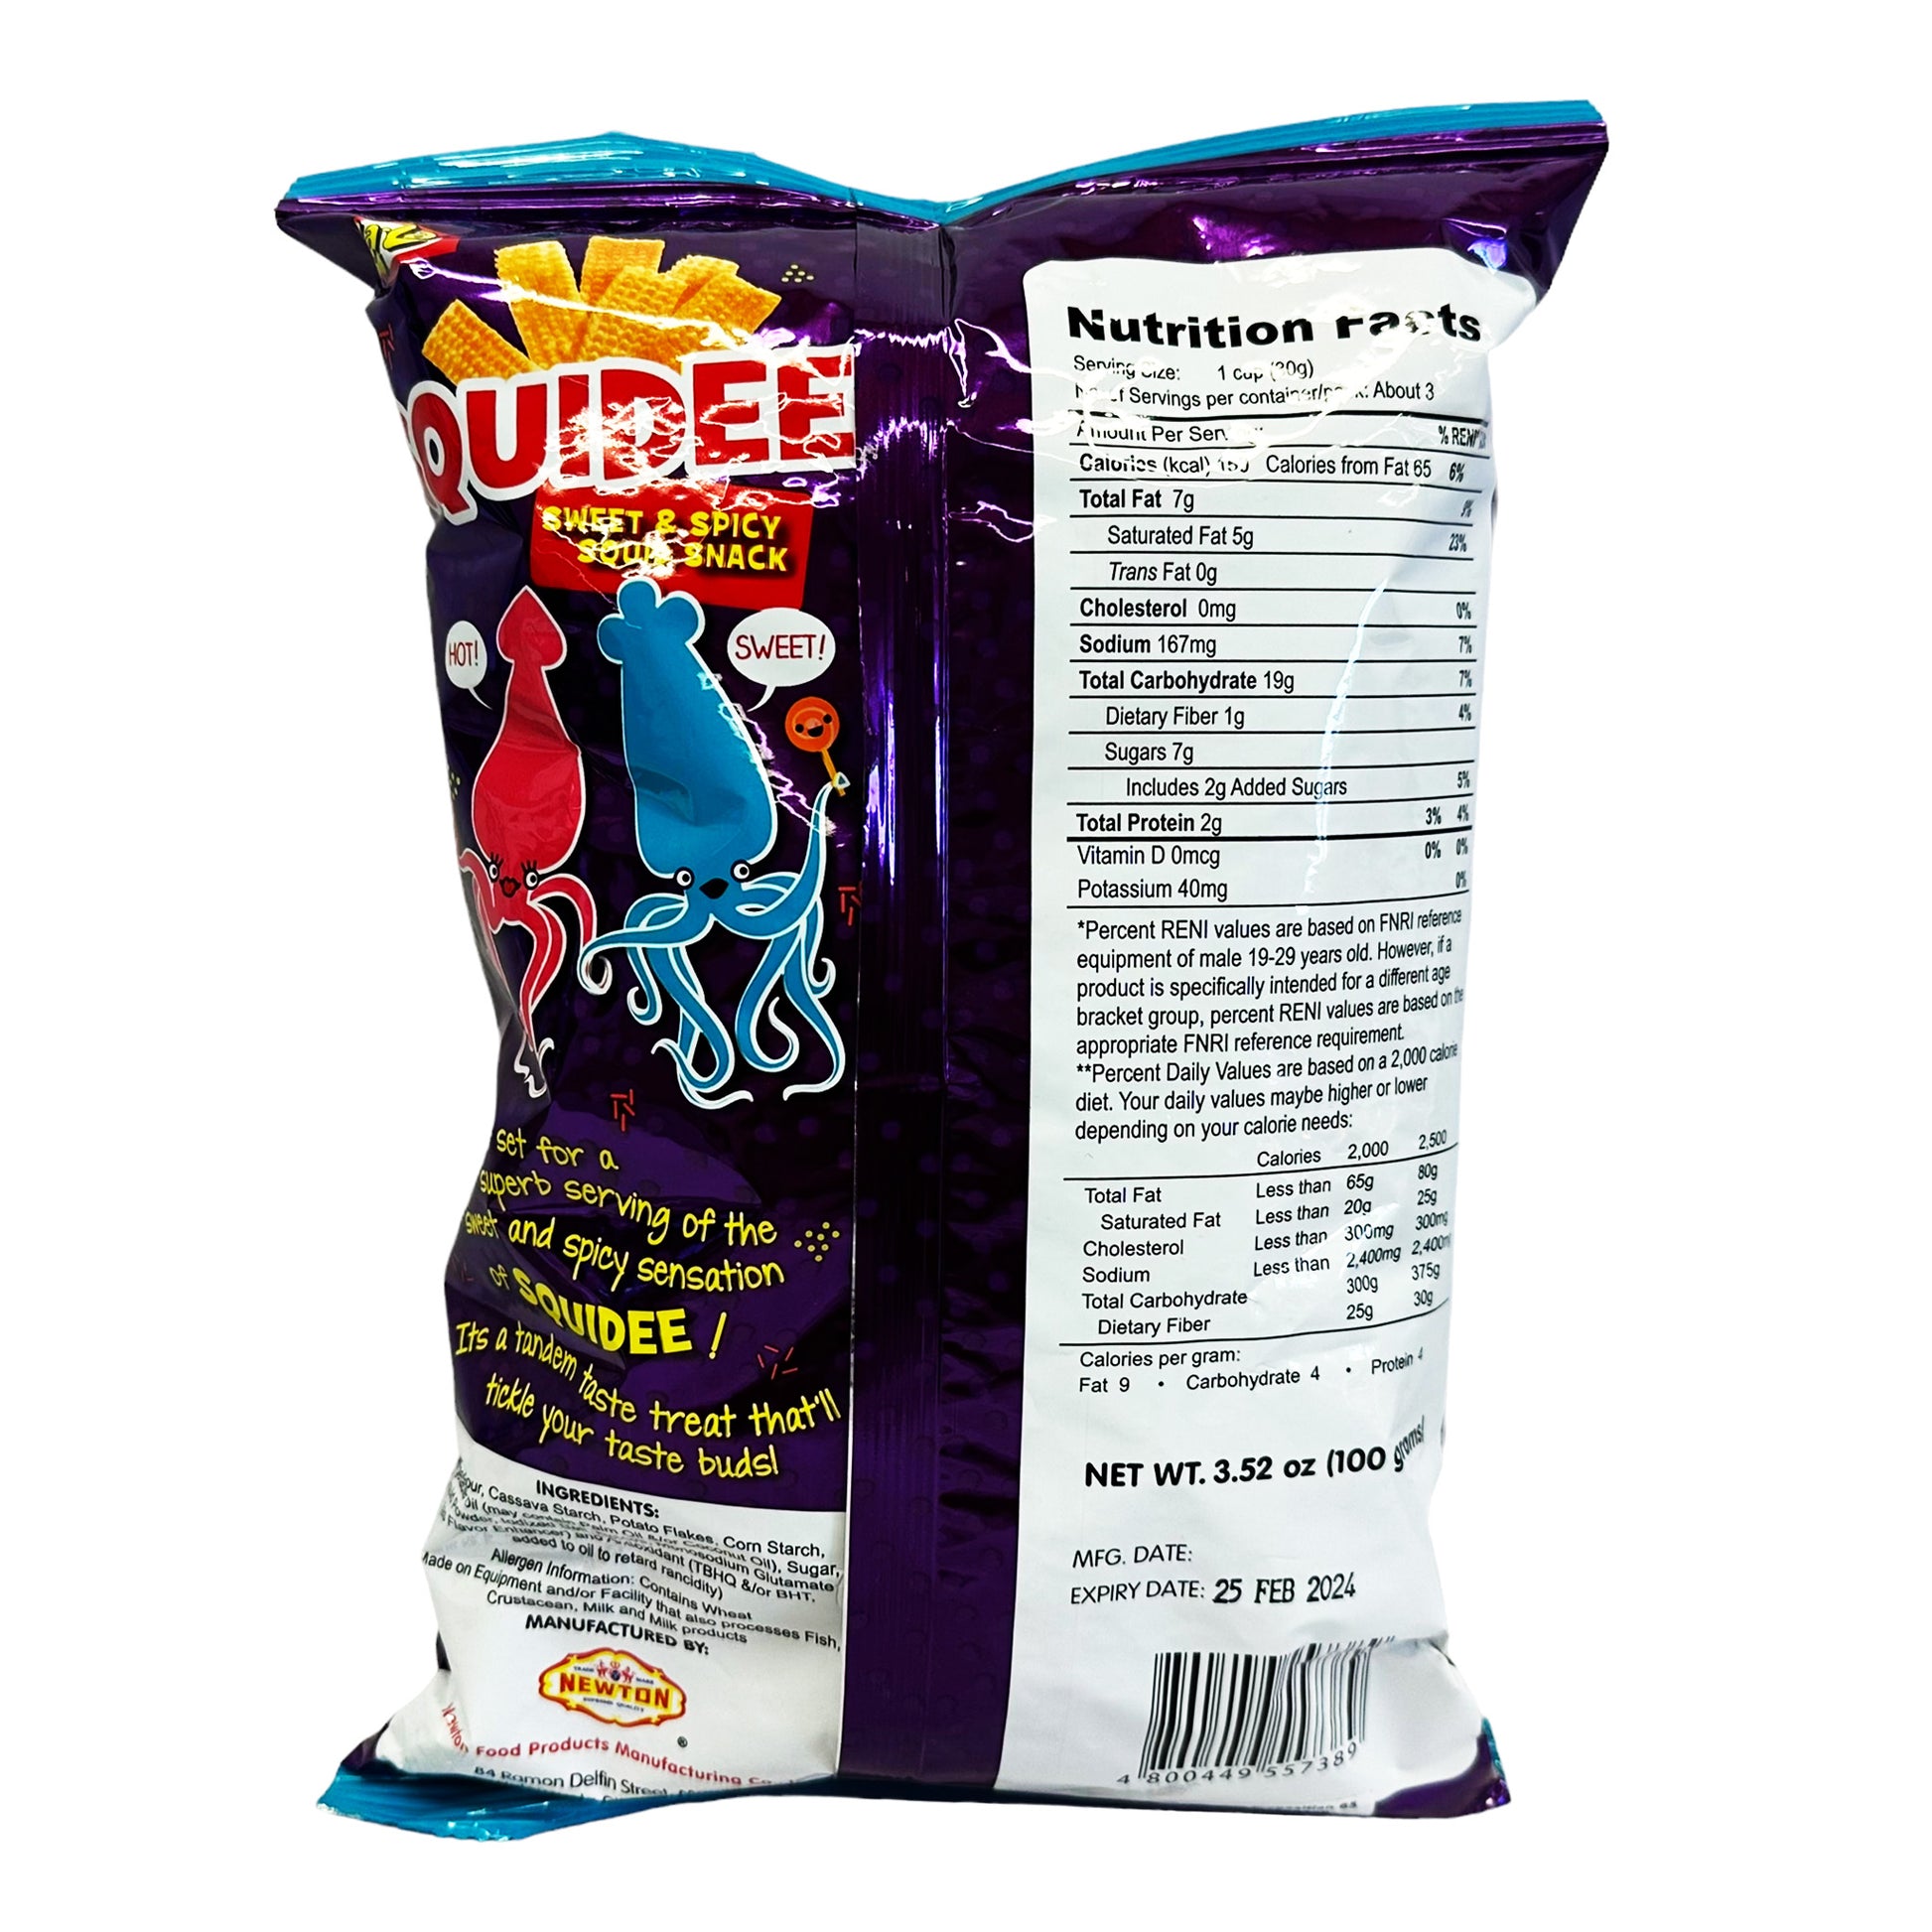 Back graphic image of Lala Squidee Sweet & Spicy Squid Snack 3.52oz (100g)